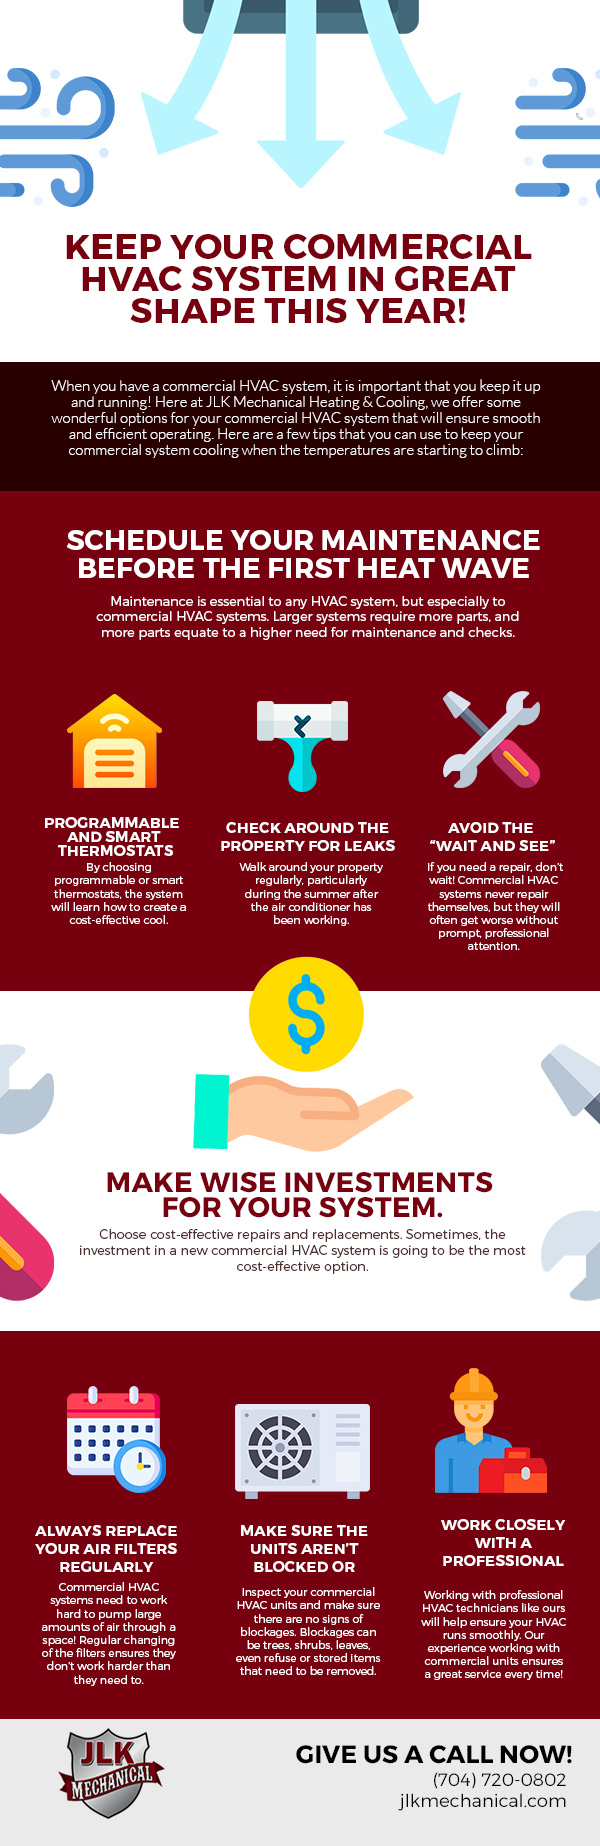 Keep Your Commercial HVAC System in Great Shape This Year! [infographic]